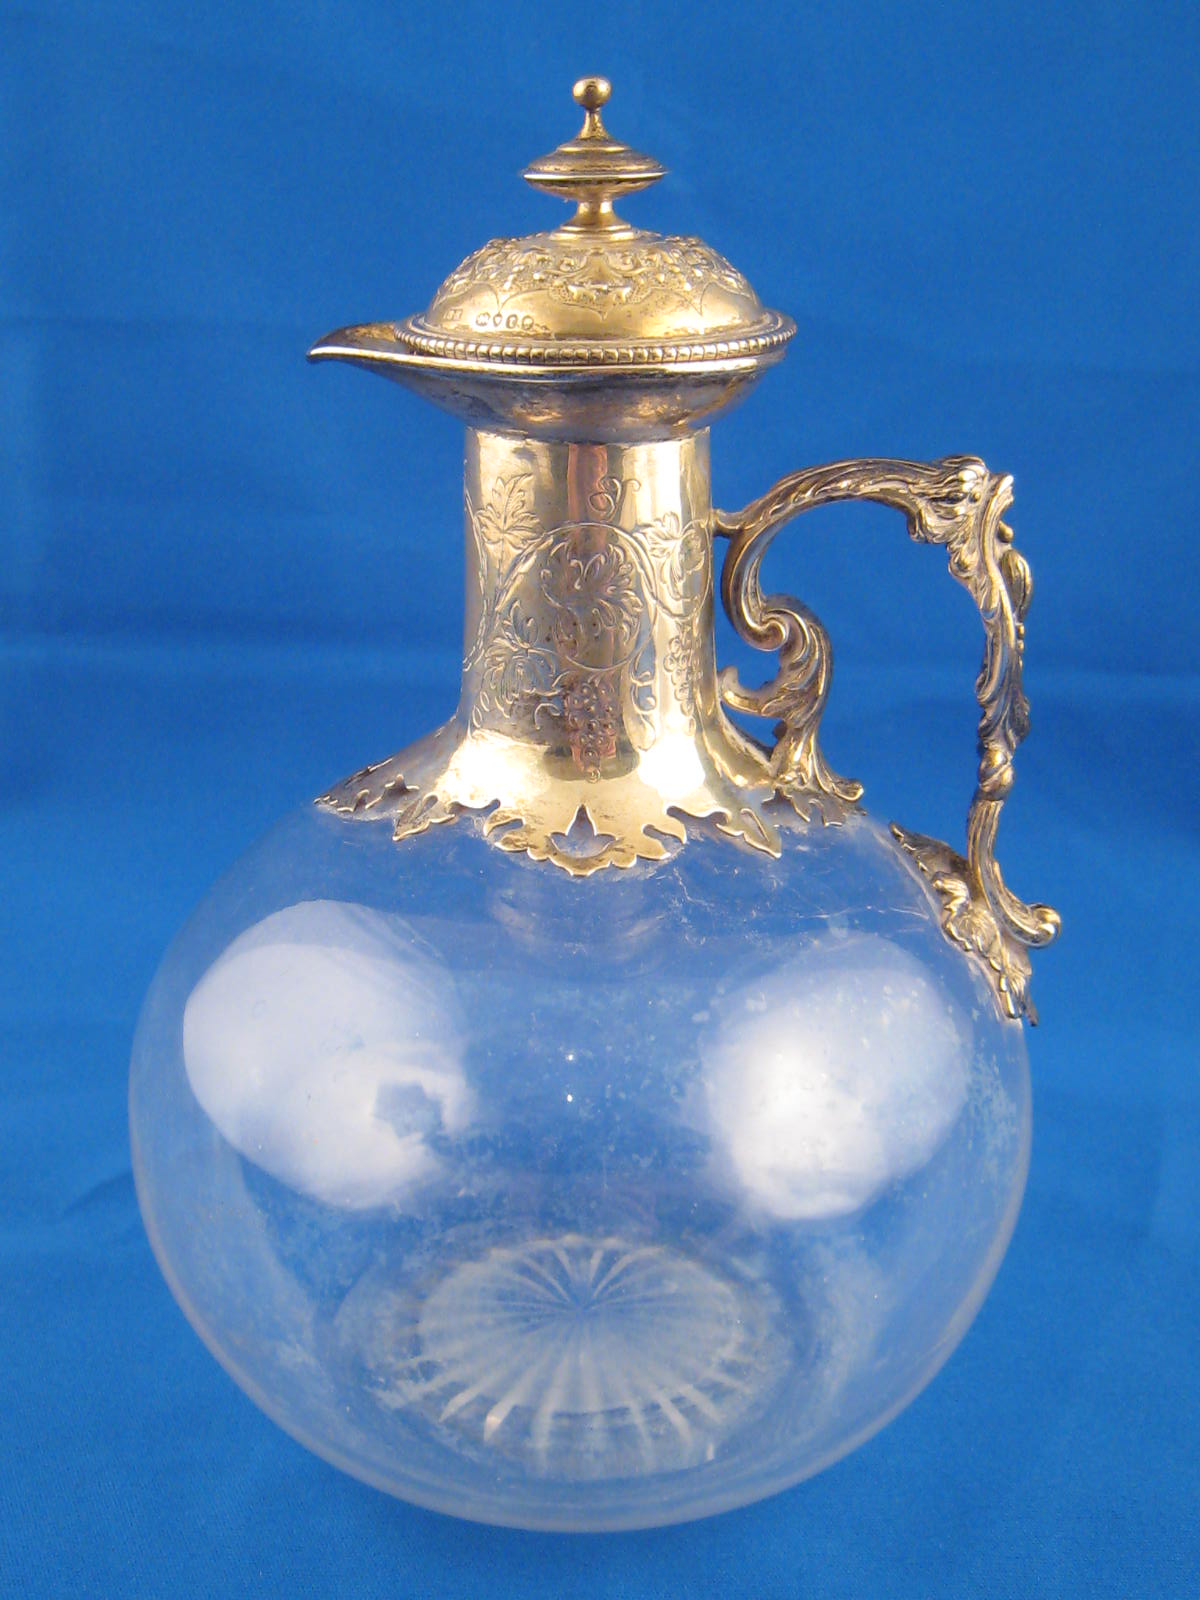 A Victorian silver mounted claret jug,by Robert Hennell, London 1859.